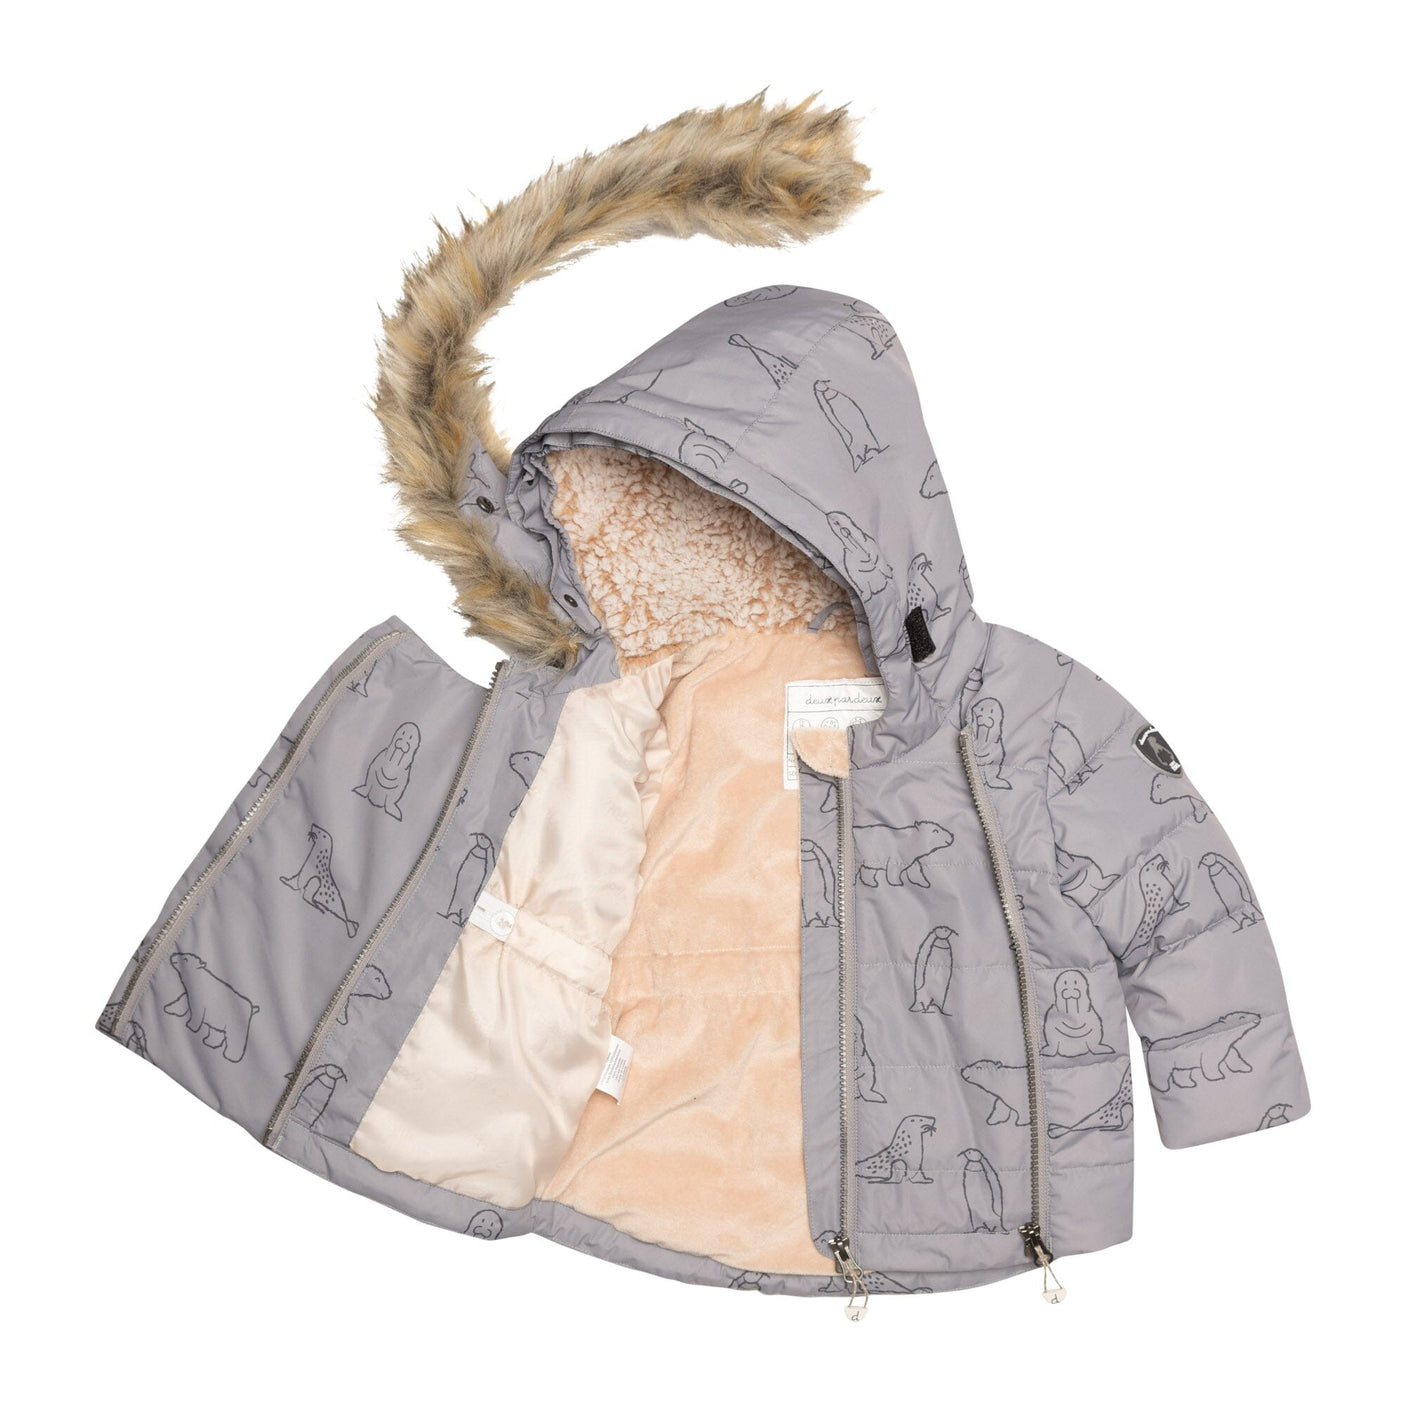 Two Piece Baby Snowsuit Grey With Arctic Friends Print-5